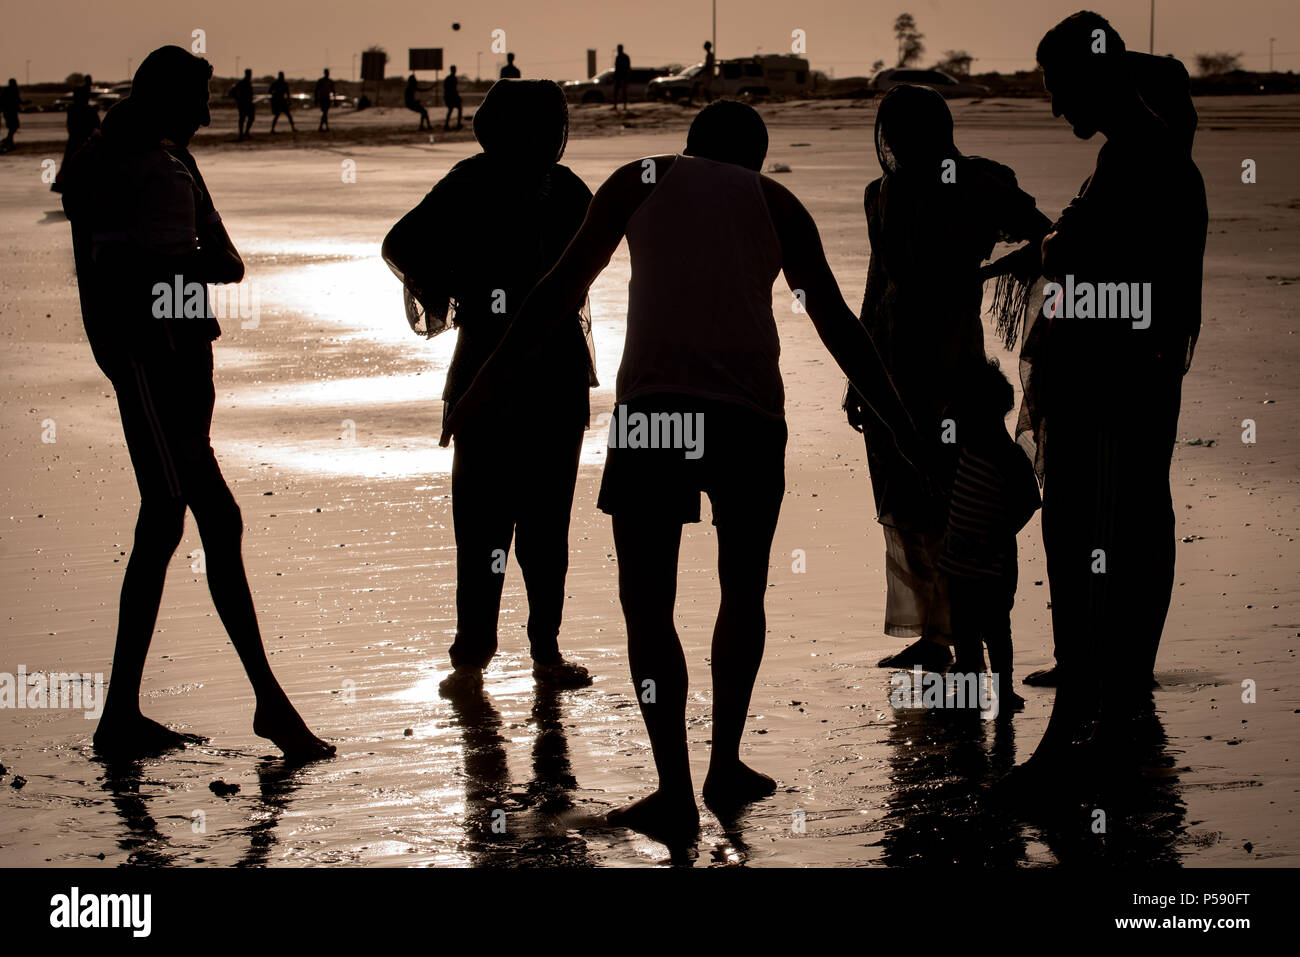 Silhouette of young adults against shining sand at Umm Al Quwain beach Stock Photo